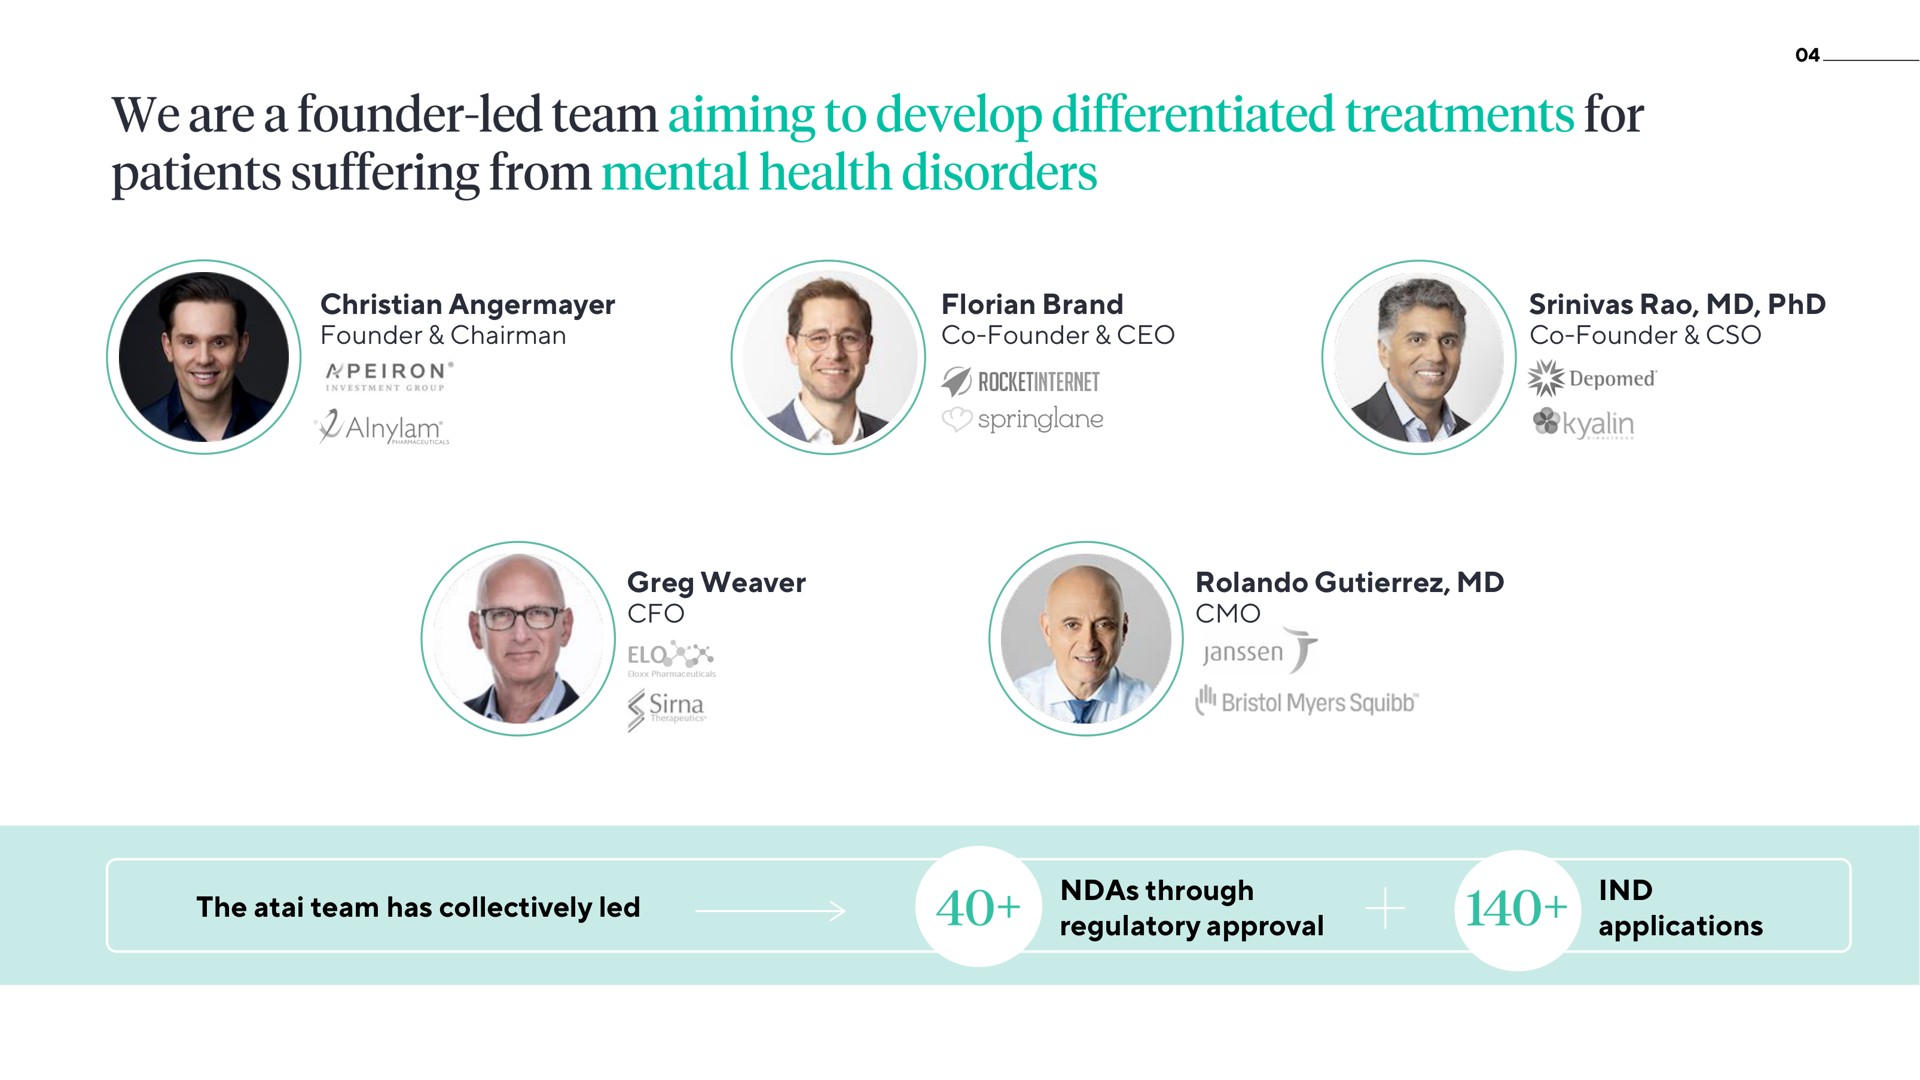 founder chairman brand founder founder weaver the team has collectively led through regulatory approval applications a founder led aiming to develop differentiated treatments for patients suffering from mental health disorders | ATAI